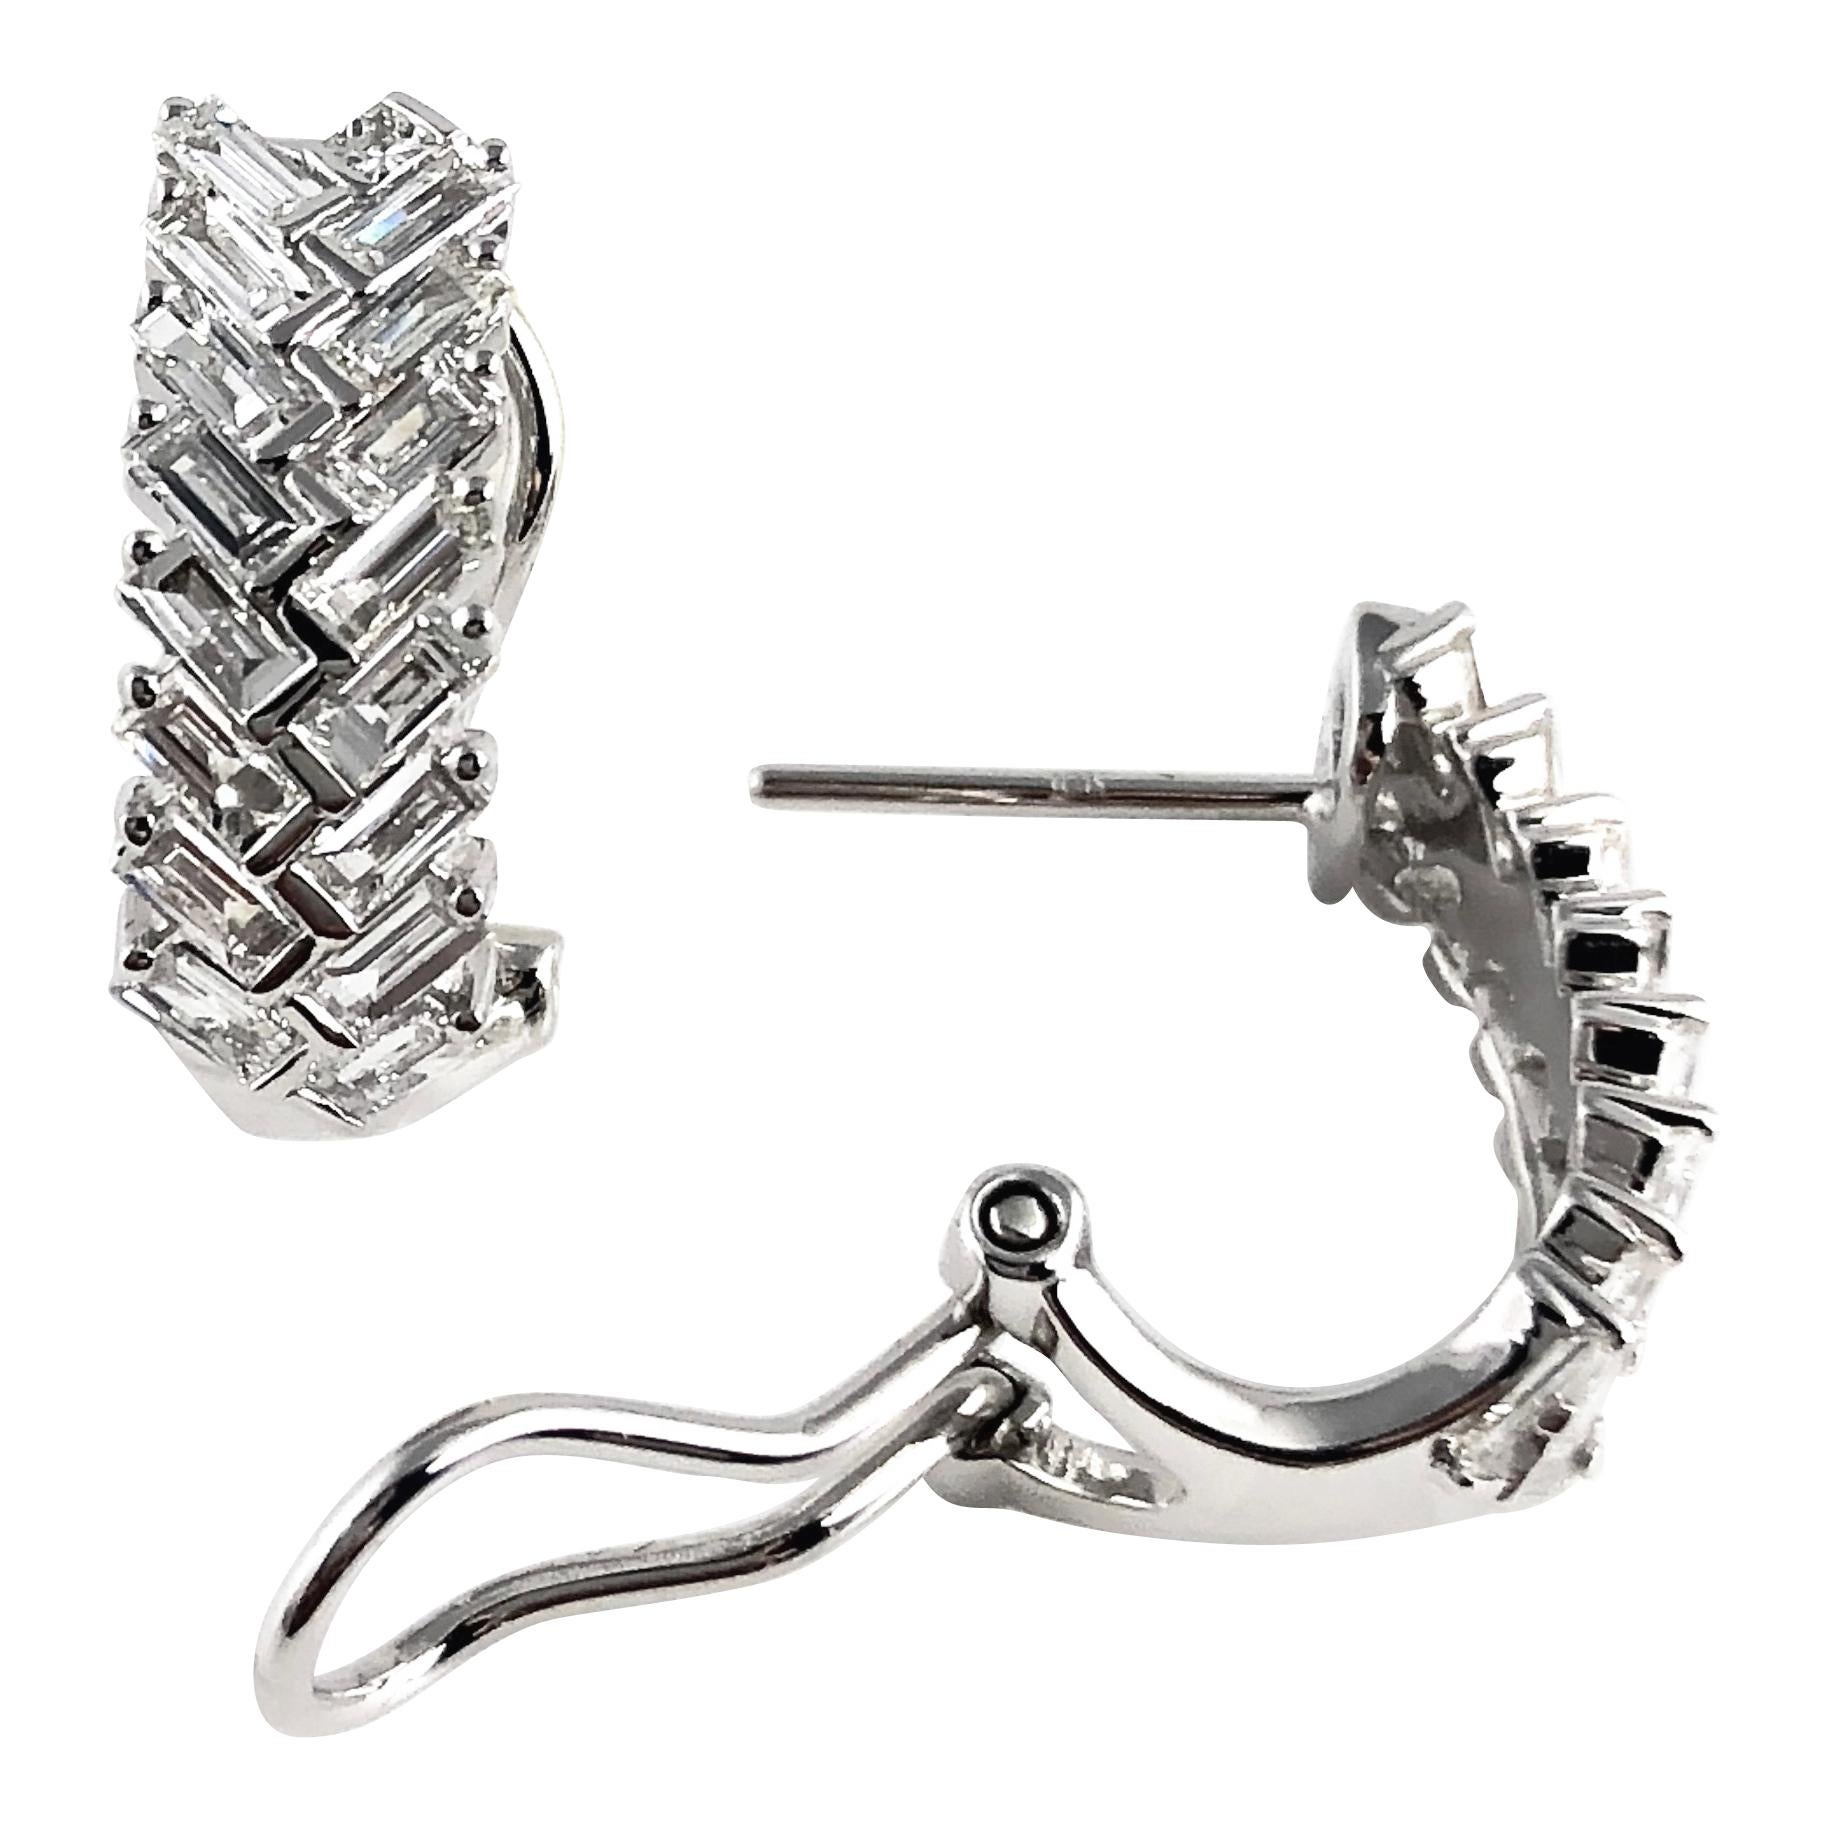 These lovely lever-back stud earrings feature baguette diamonds in an interlocking chevron pattern. The total diamond weight is 1.36 carats. 

Last call winter sale.
Sale ends February 19, 2019.

Many of our items have matching companion pieces.